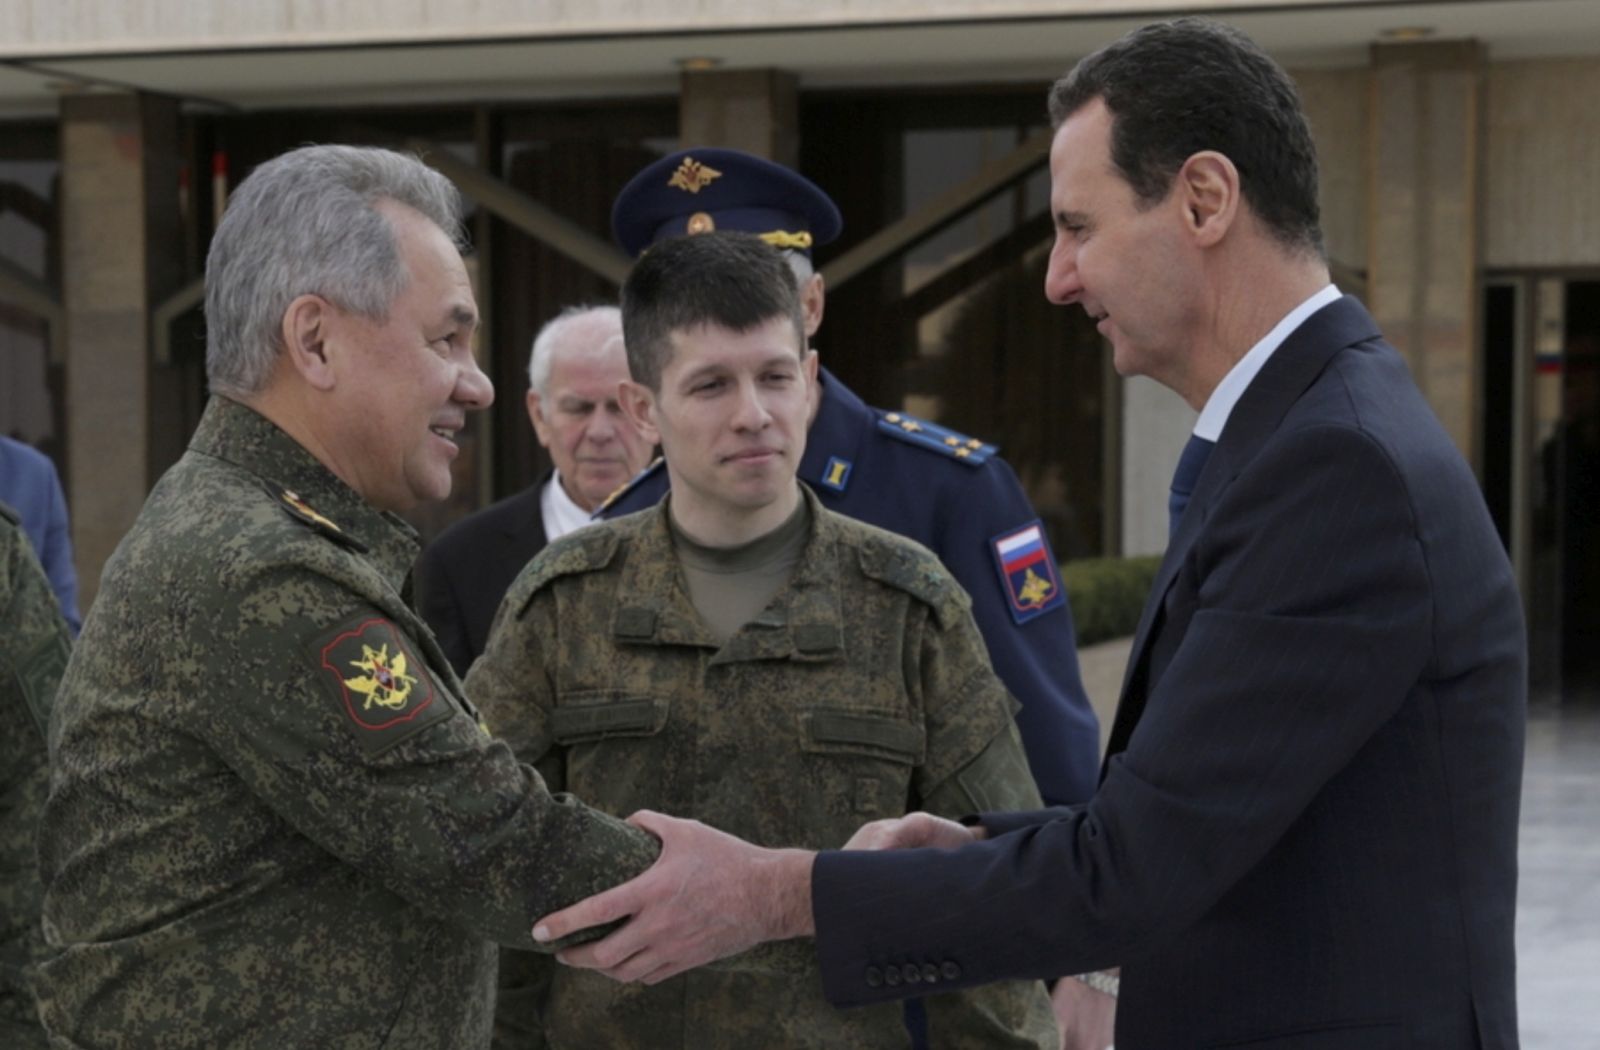 epa09759815 A handout image made available by the Russian Defence Ministry press service shows Russian Defense Minister General of the Army Sergei Shoigu (L) shakes hands with Syrian President Bashar al-Assad (R) during their meeting in Damascus, Syria, 15 February 2022.  EPA/RUSSIAN DEFENCE MINISTRY PRESS SERVICE/HANDOUT MANDATORY CREDIT HANDOUT EDITORIAL USE ONLY/NO SALES